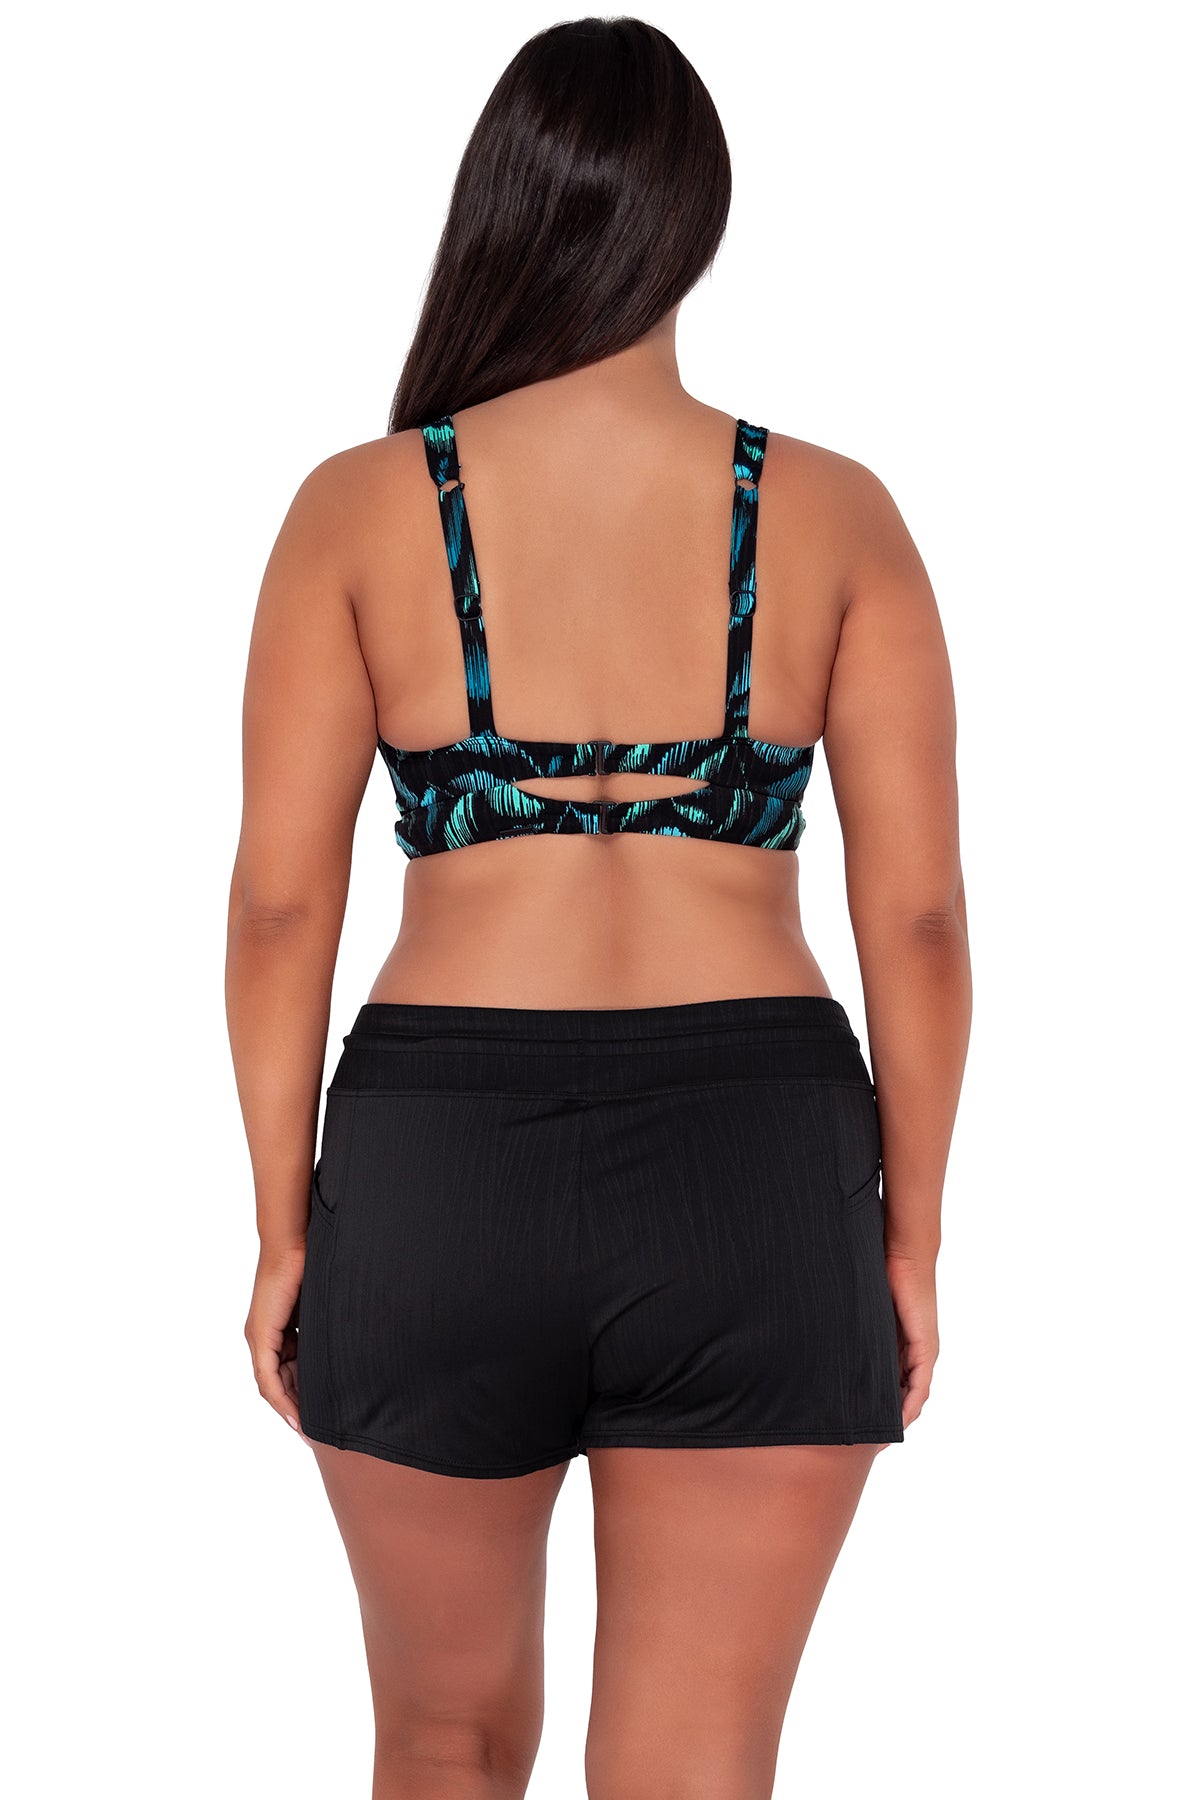 Back pose #1 of Nicki wearing Sunsets Cascade Seagrass Texture Danica Top paired with Laguna Swim Short women's casual wear